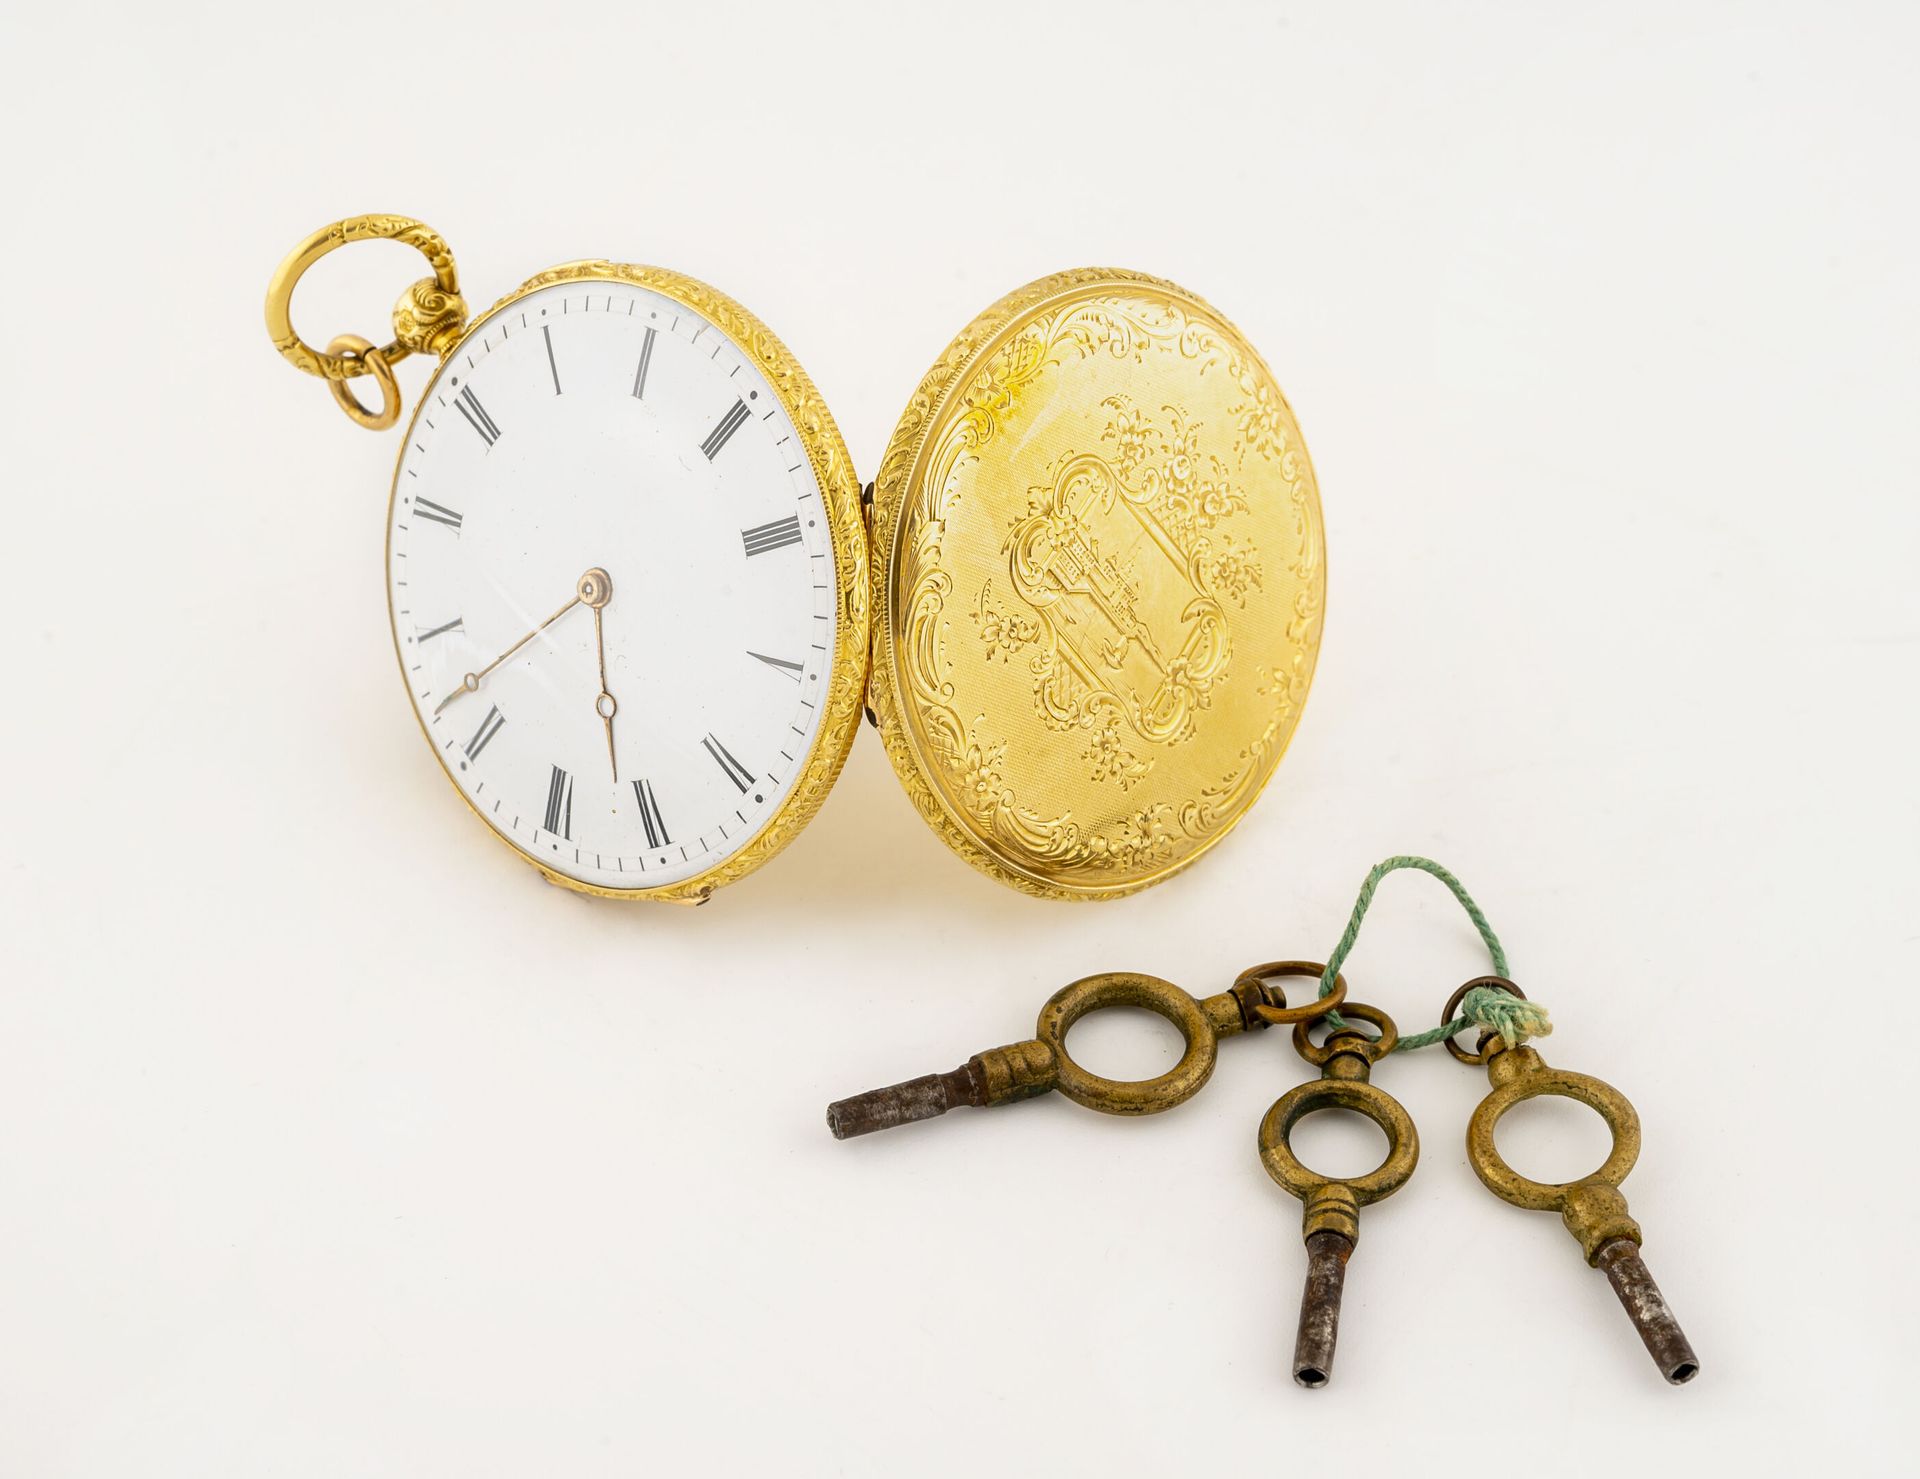 Null Yellow gold (750) pocket watch.

Back cover decorated with landscape and pl&hellip;